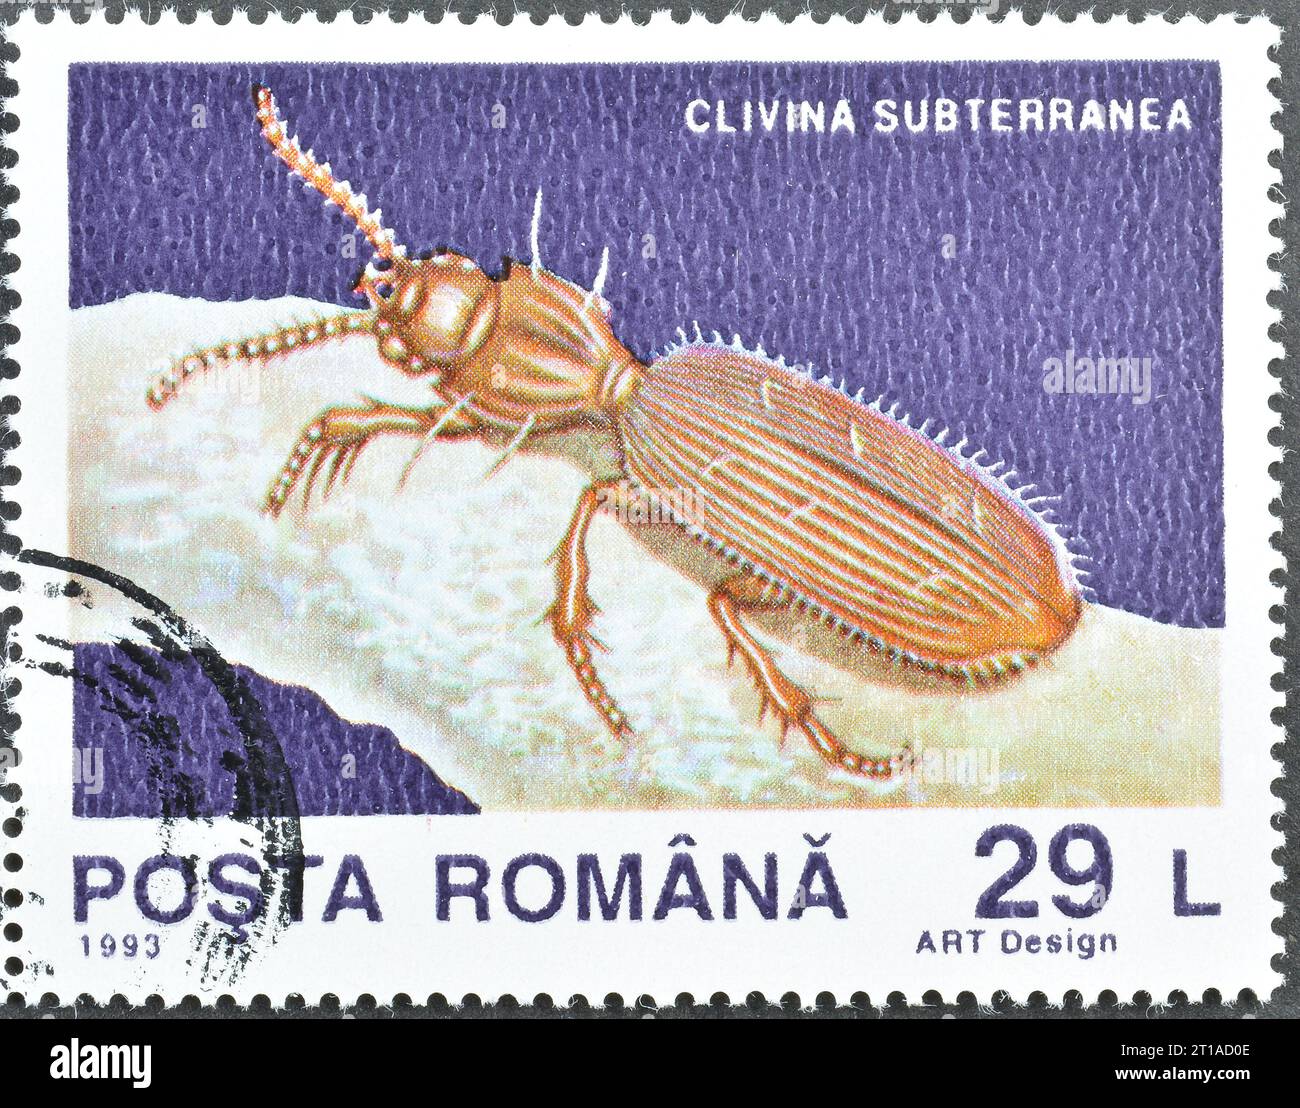 Cancelled postage stamp printed by Romania, that shows Ground Beetle (Clivina subterranea), Animals from the Movile Cavern, circa 1993. Stock Photo